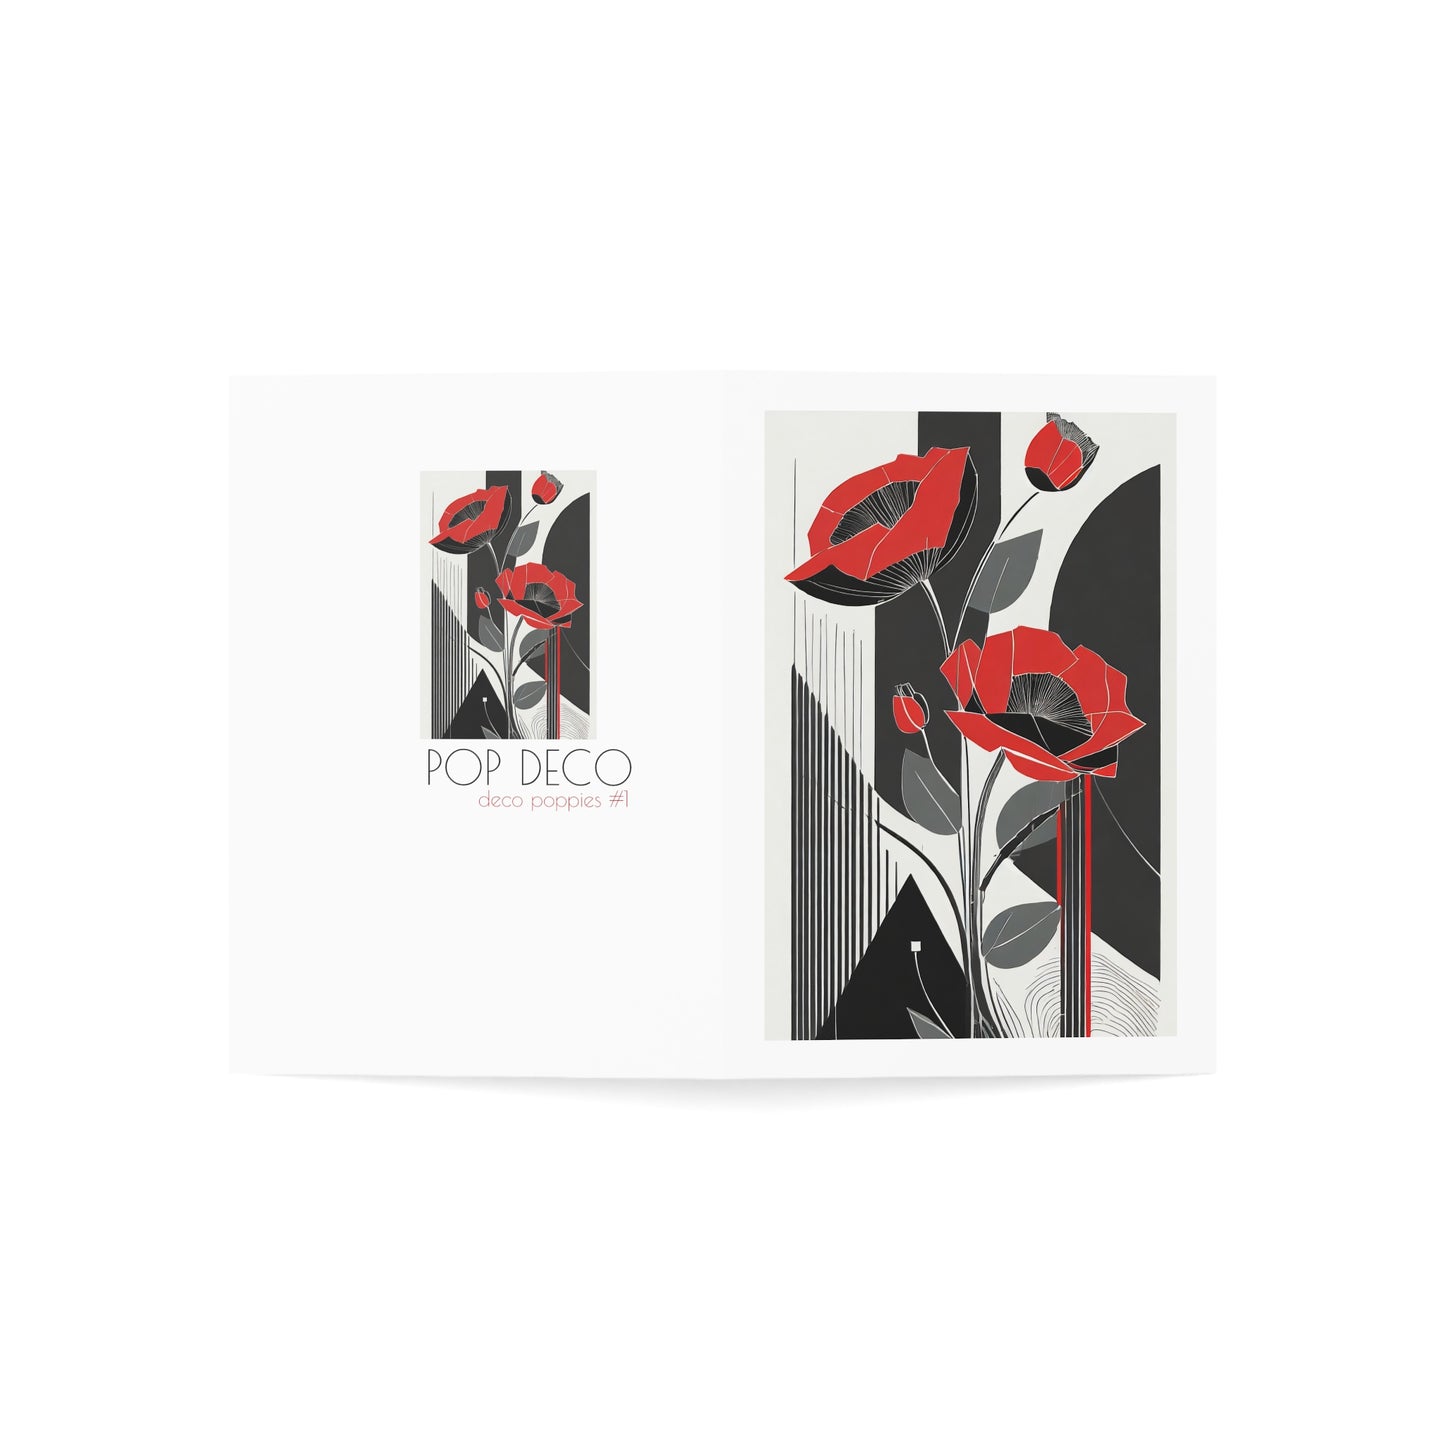 Art Deco Flower Card with Red Poppies Note Card Abstract Flower Birthday Card Art Deco Red Flowers Minimalist Flower Card for Mother's Day